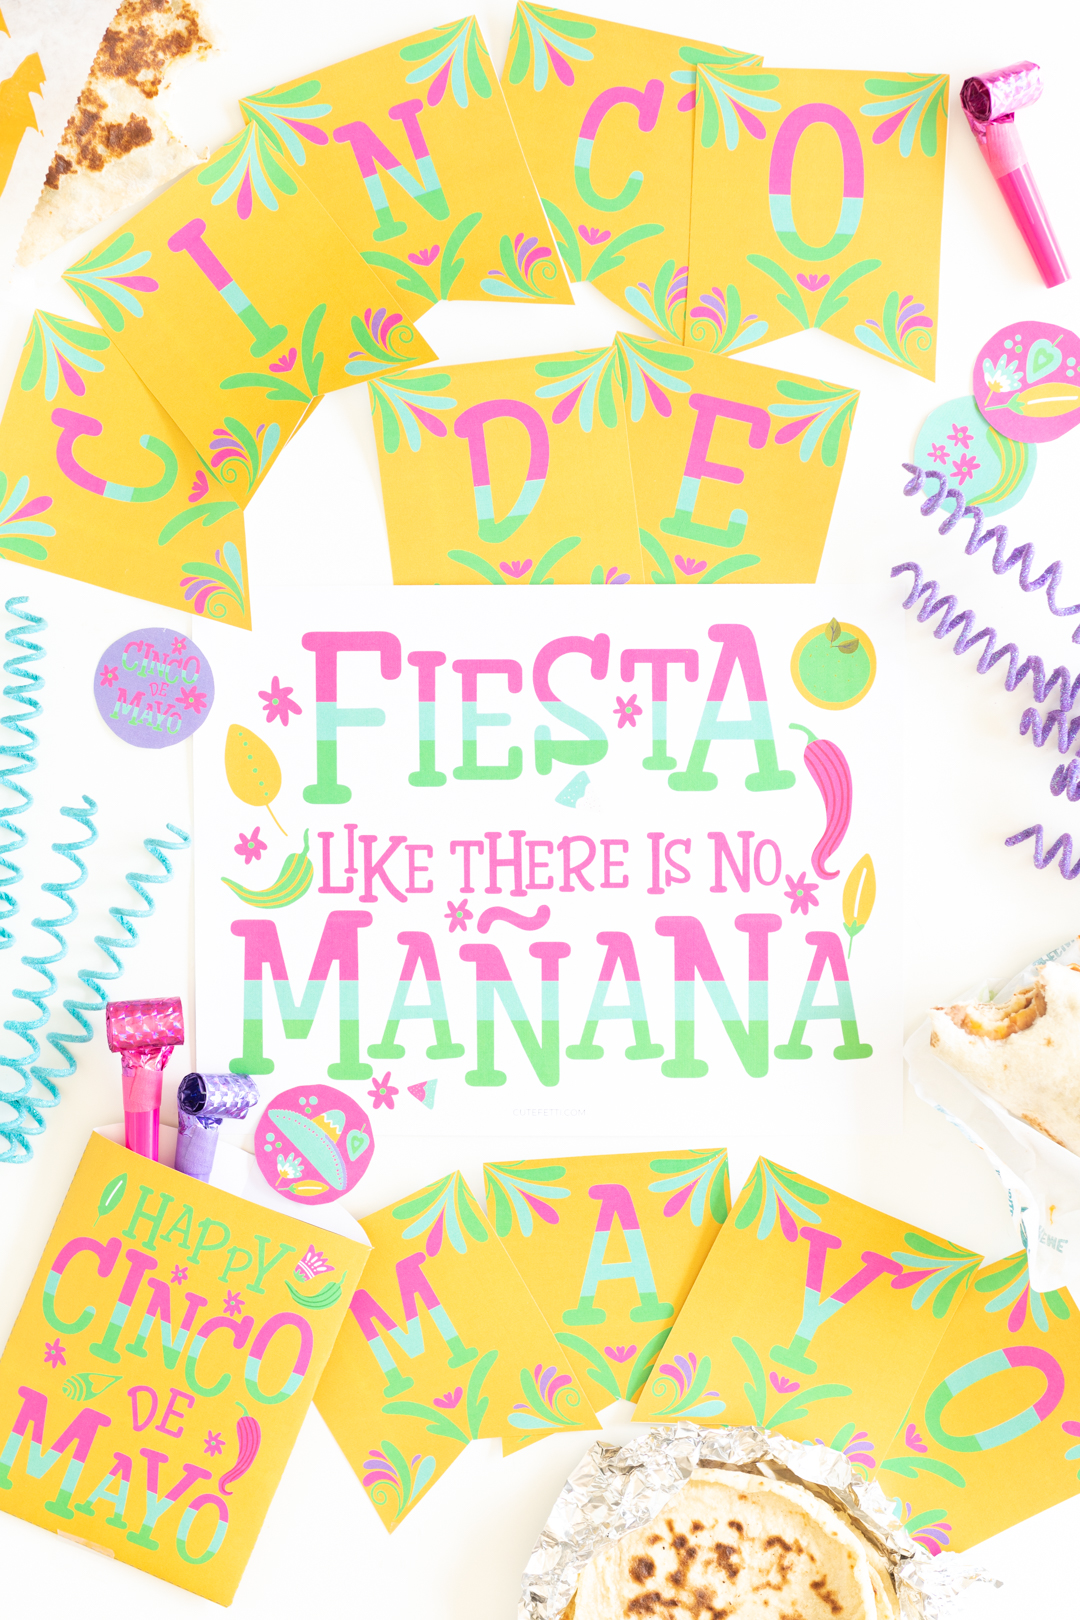 sign that says fiesta like there is no manana set among other party supplies like a cinco de mayo banner, party blowers and Mexican food